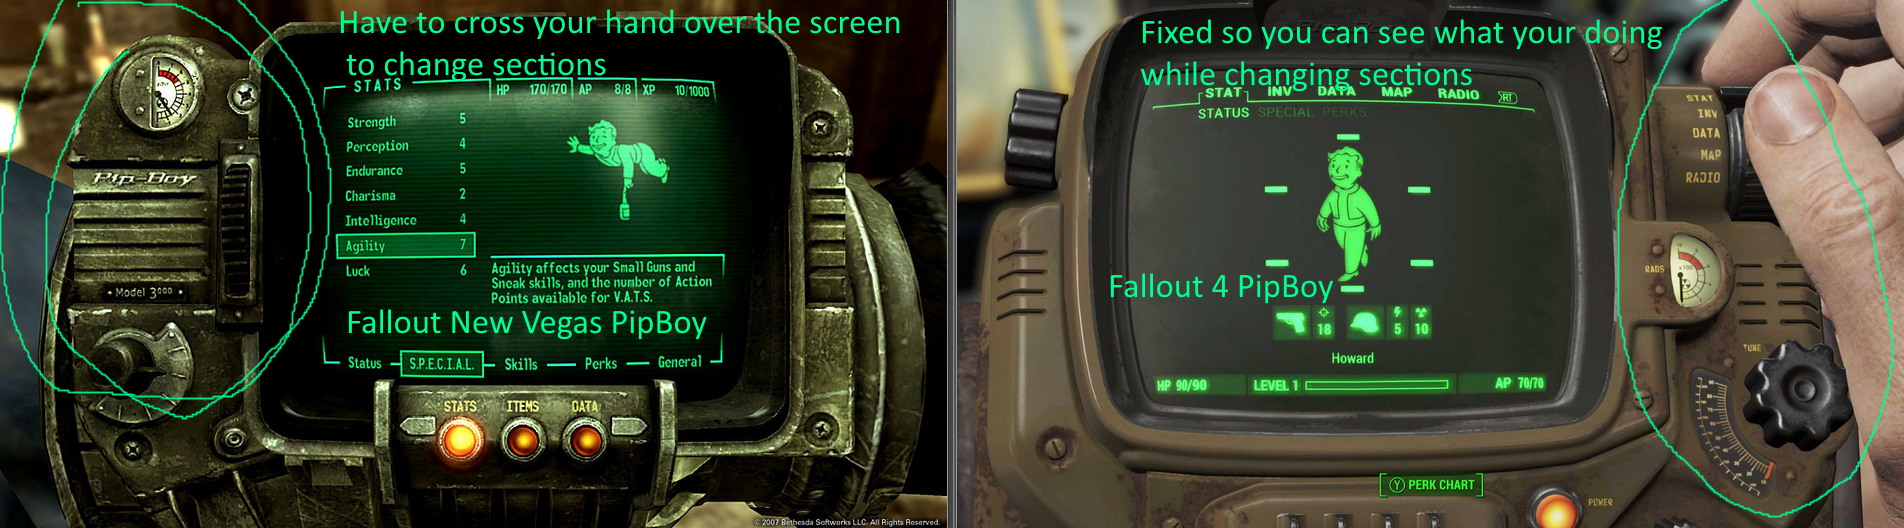 fall out pip boy - Have to cross your hand over the screen to change section Fixed so you can see what your doing while changing sections Fallout 4 PipBoy Fallout New Vegas PipBoy Well Radar